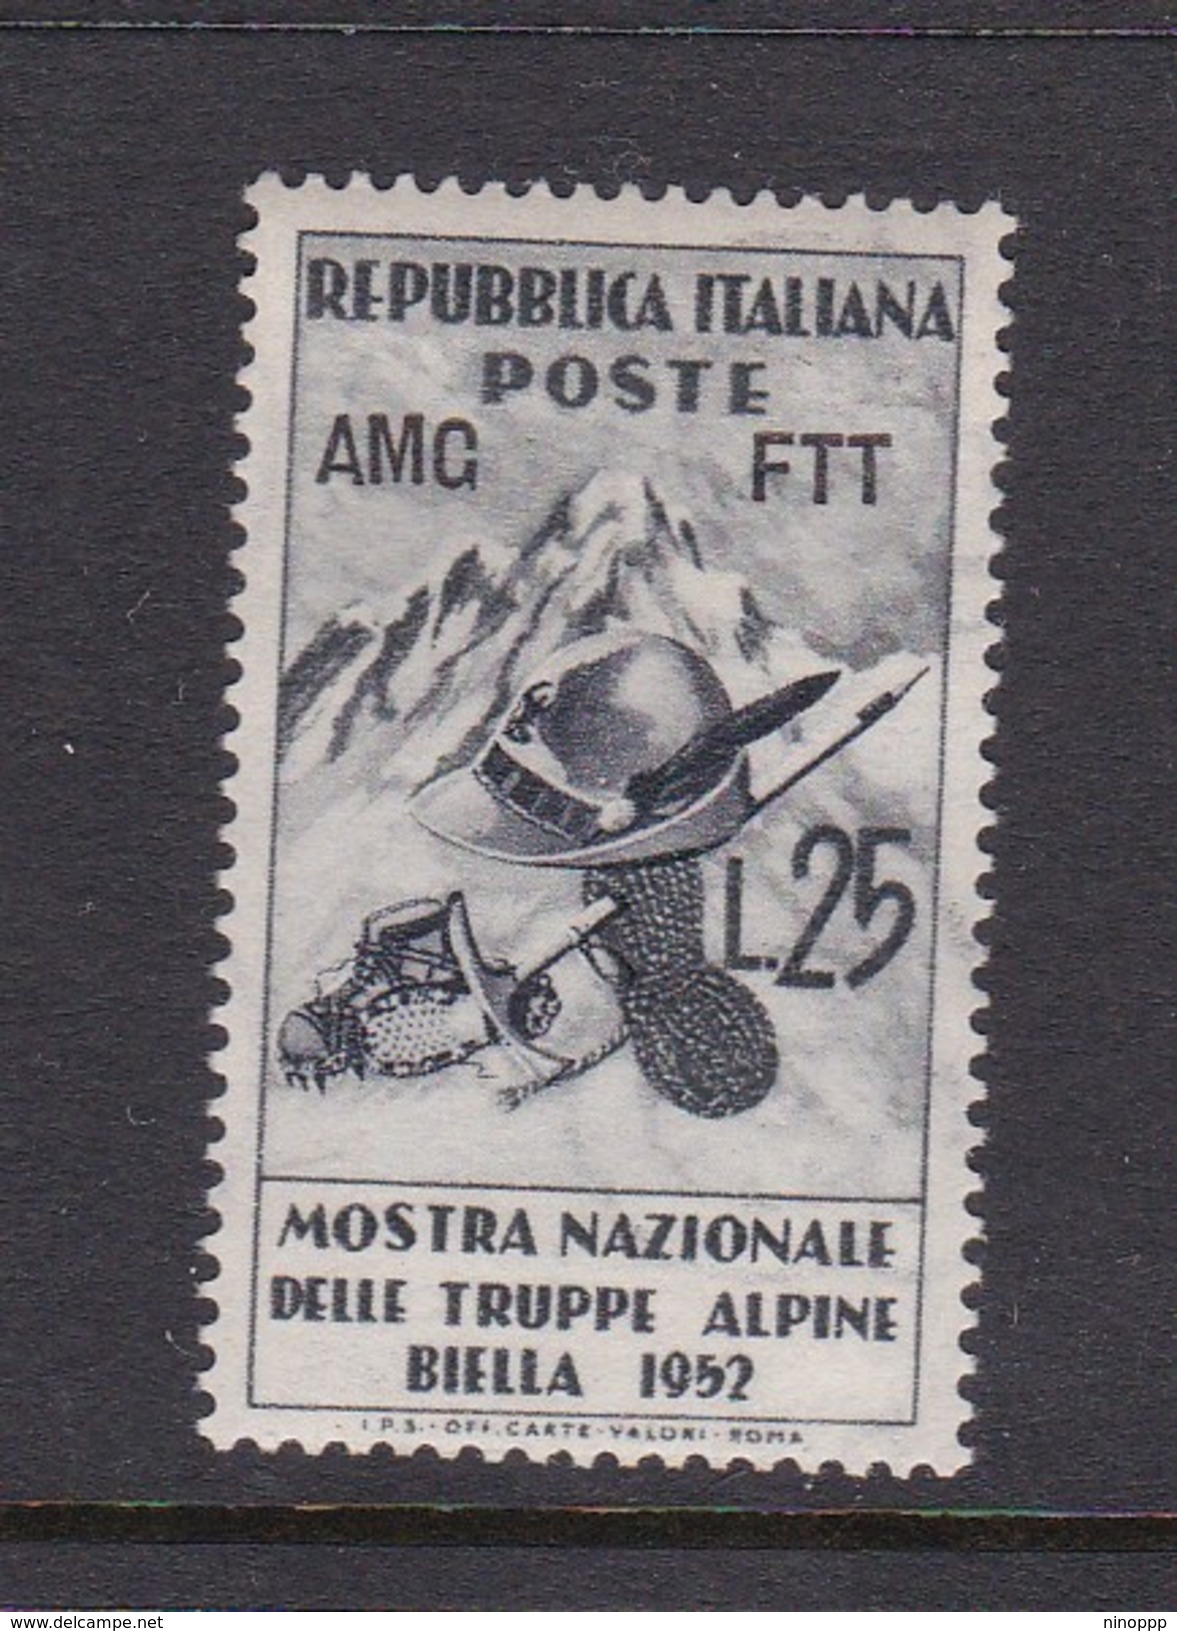 Trieste Allied Military Government S 156 1952 Alpine Troops, MNH - Mint/hinged